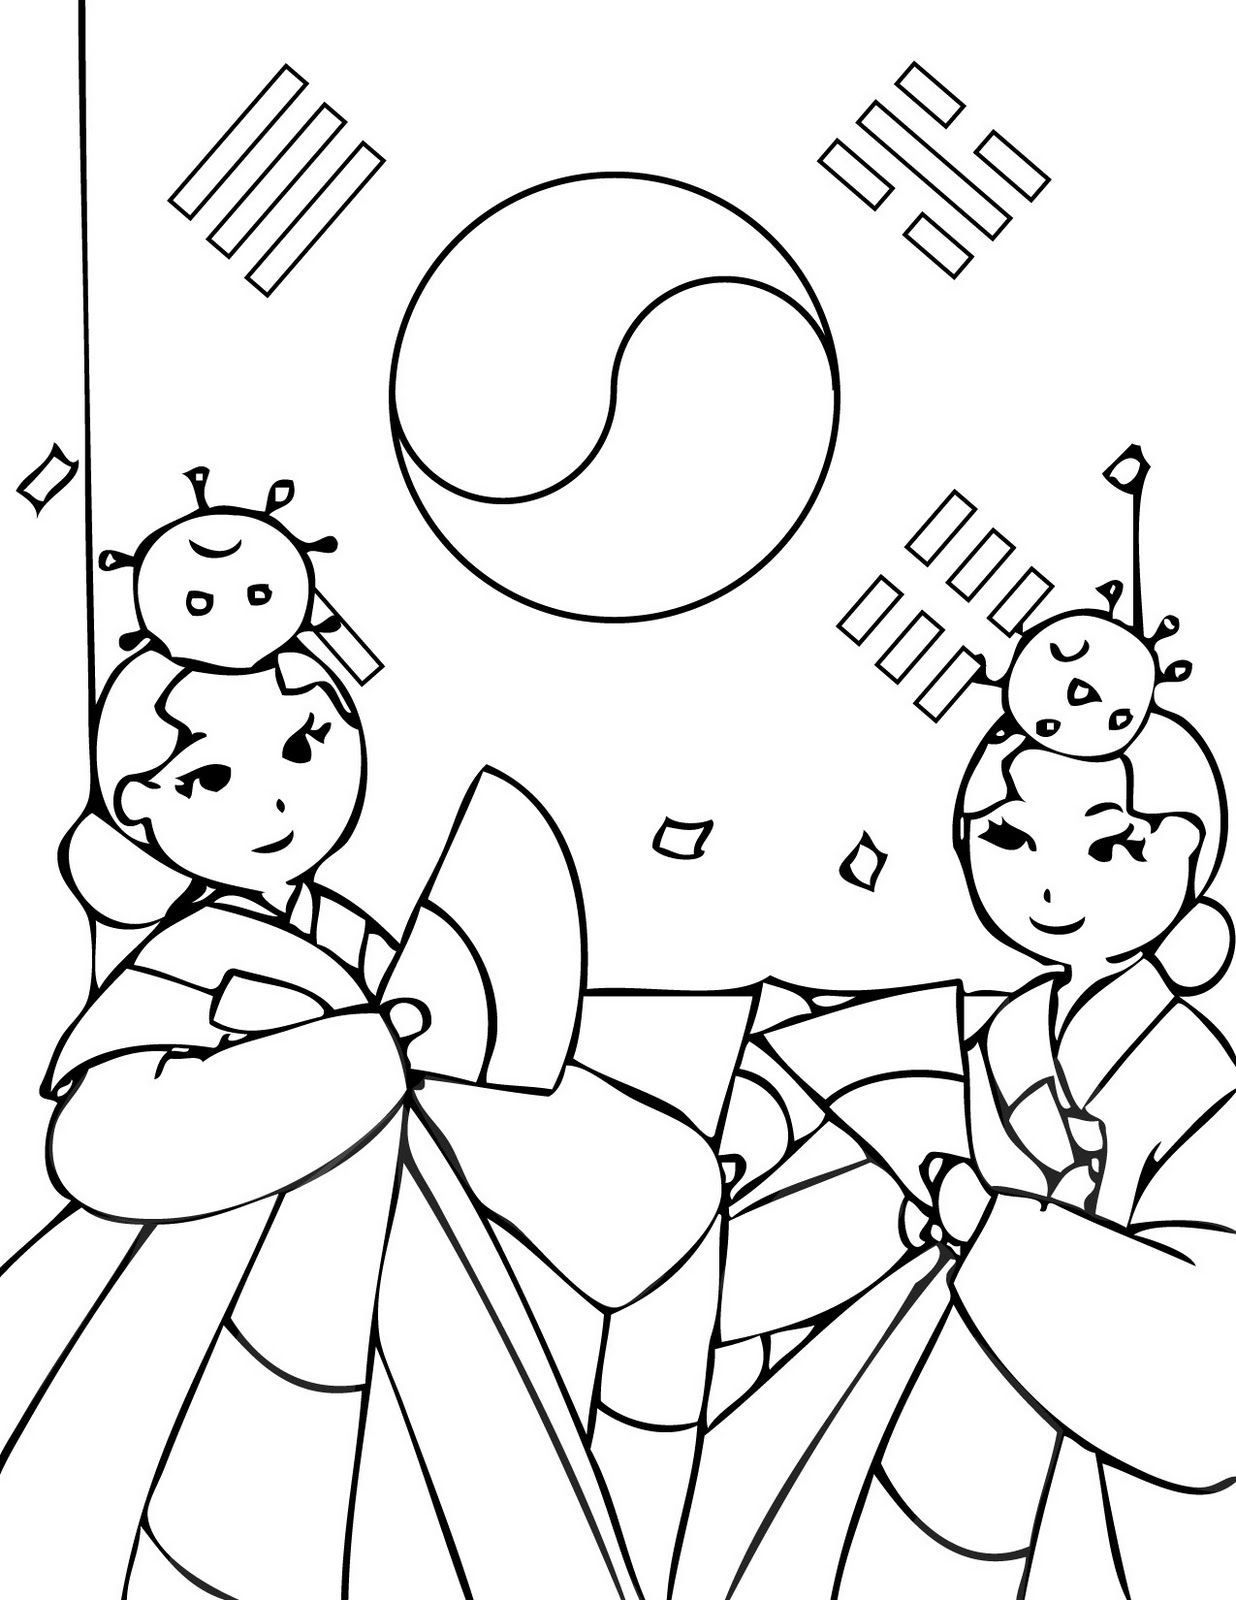 55 Best Korean Coloring Pages images in 2020 | Coloring pages ...